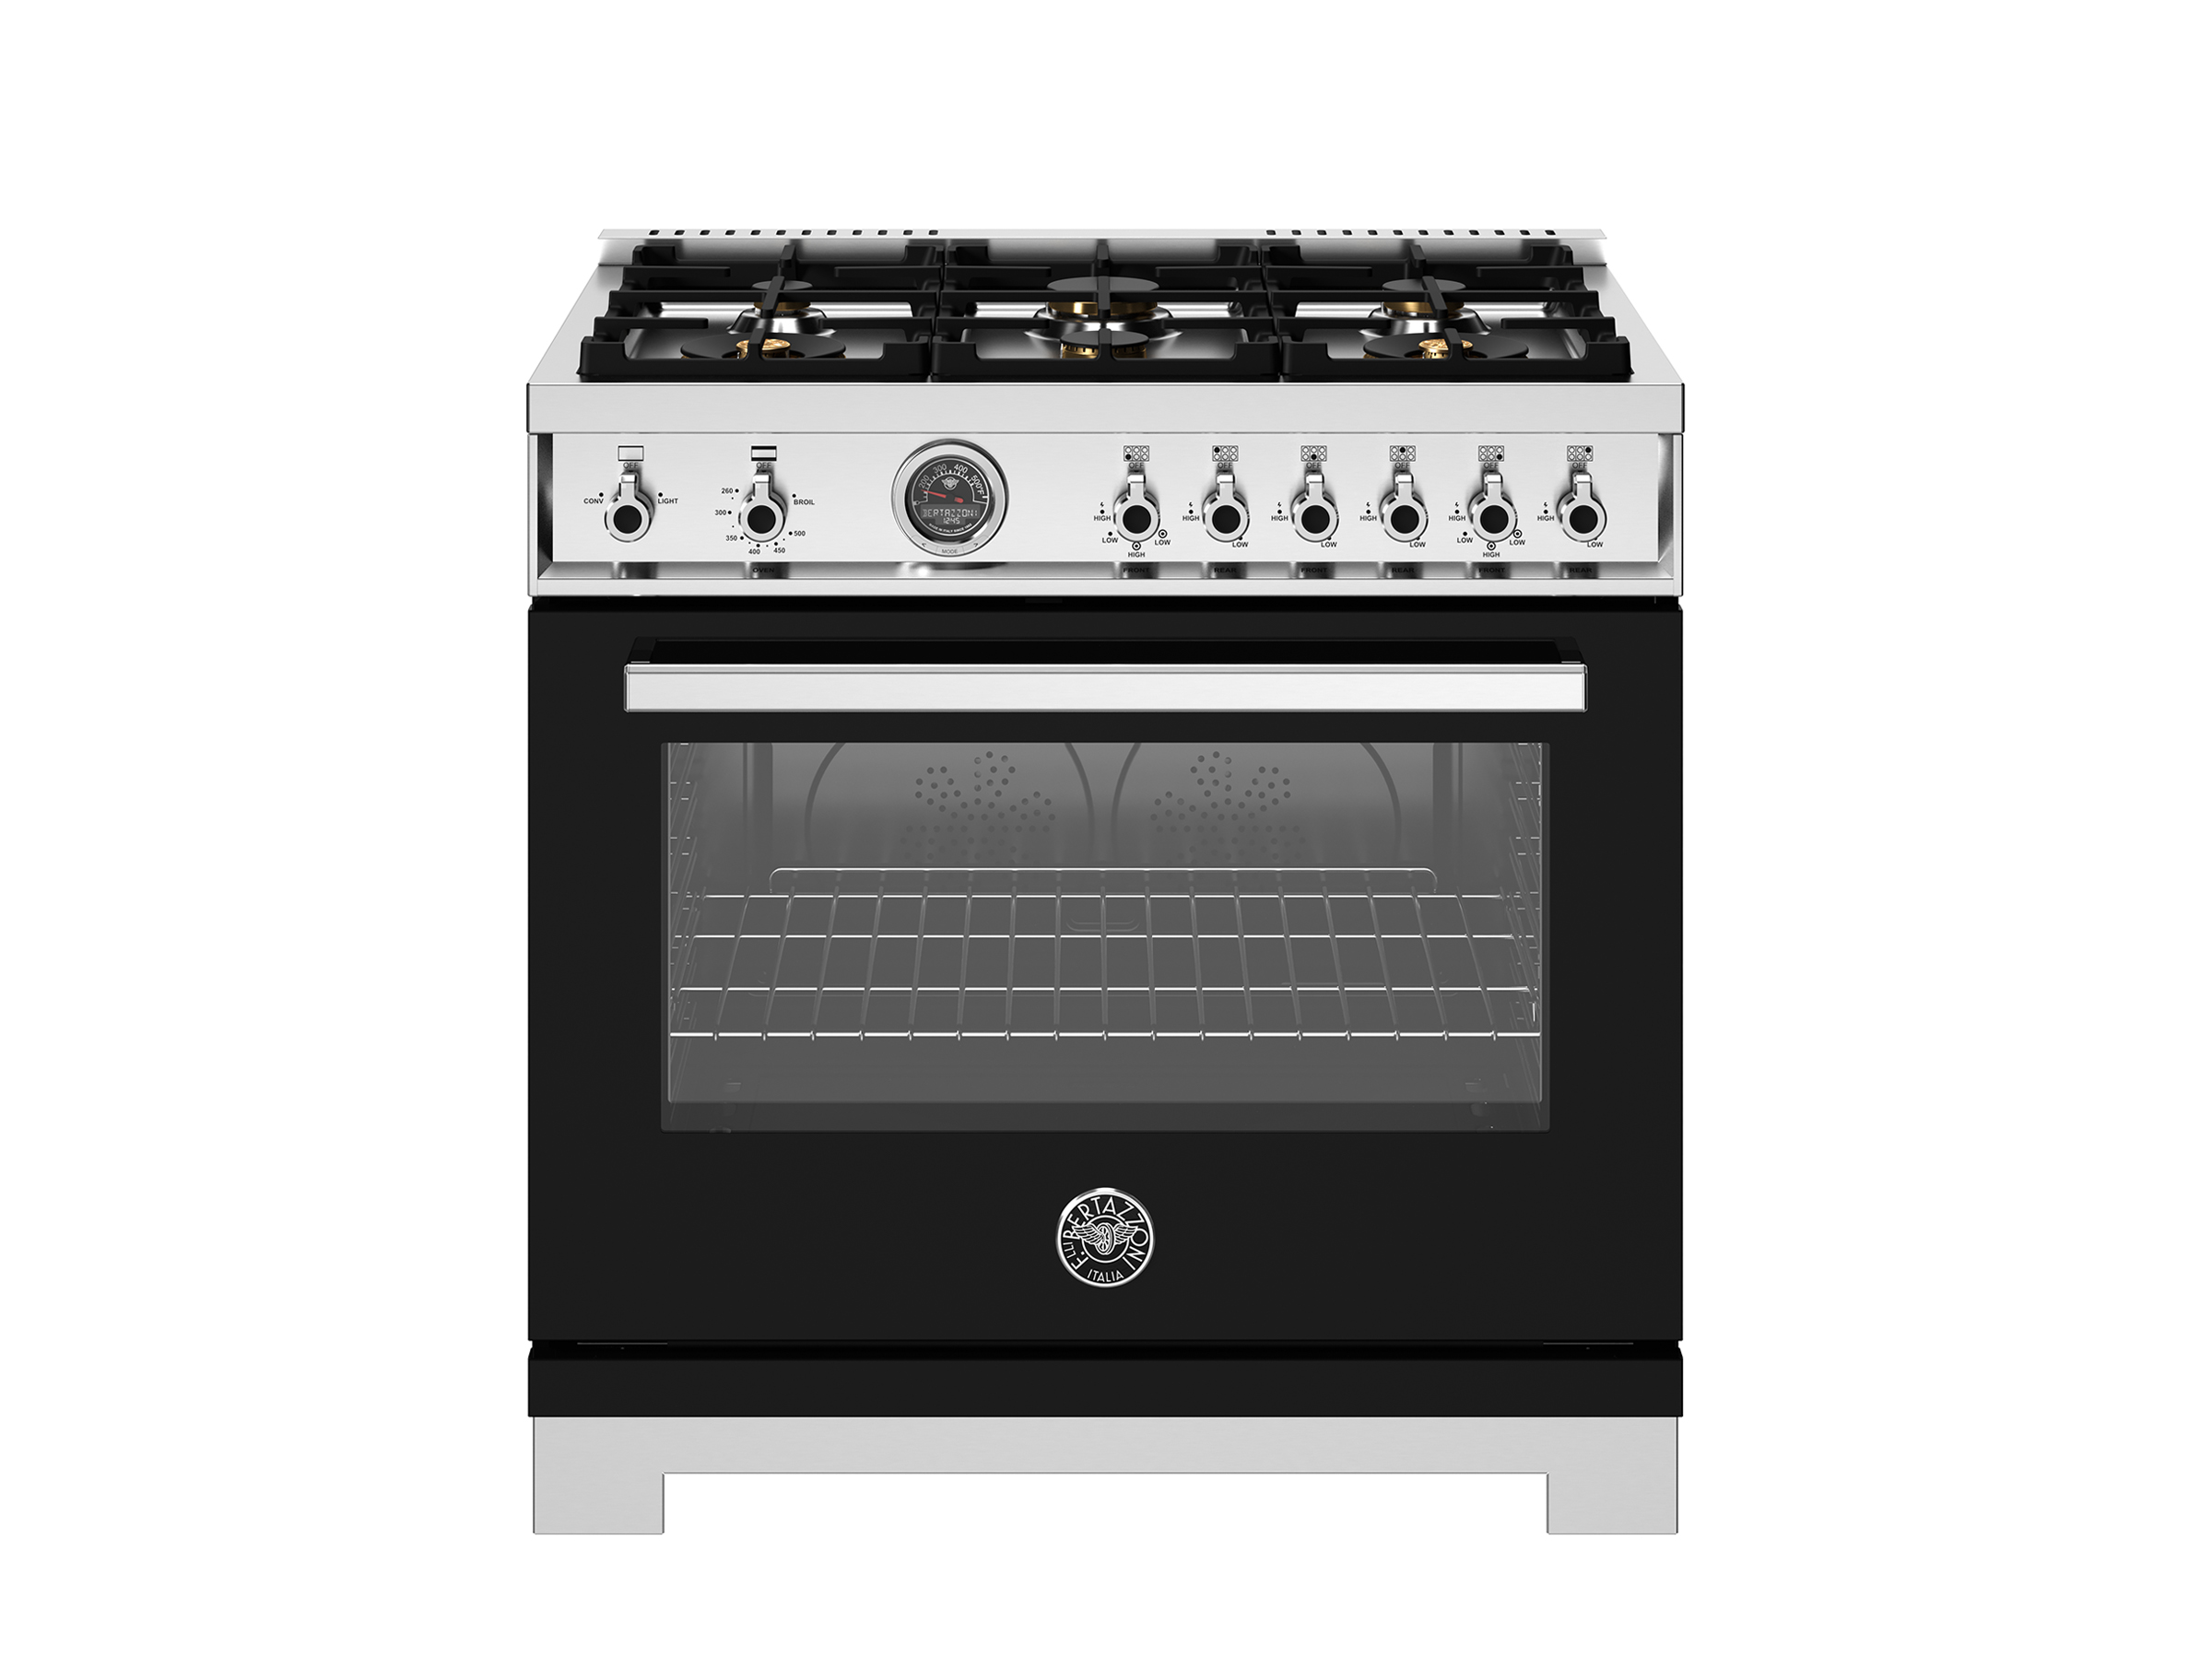 Bertazzoni - HER366BCFEPAVT - 36 inch Dual Fuel Range, 6 Brass Burner and  Cast Iron Griddle, Electric Self-Clean Oven Heritage Series